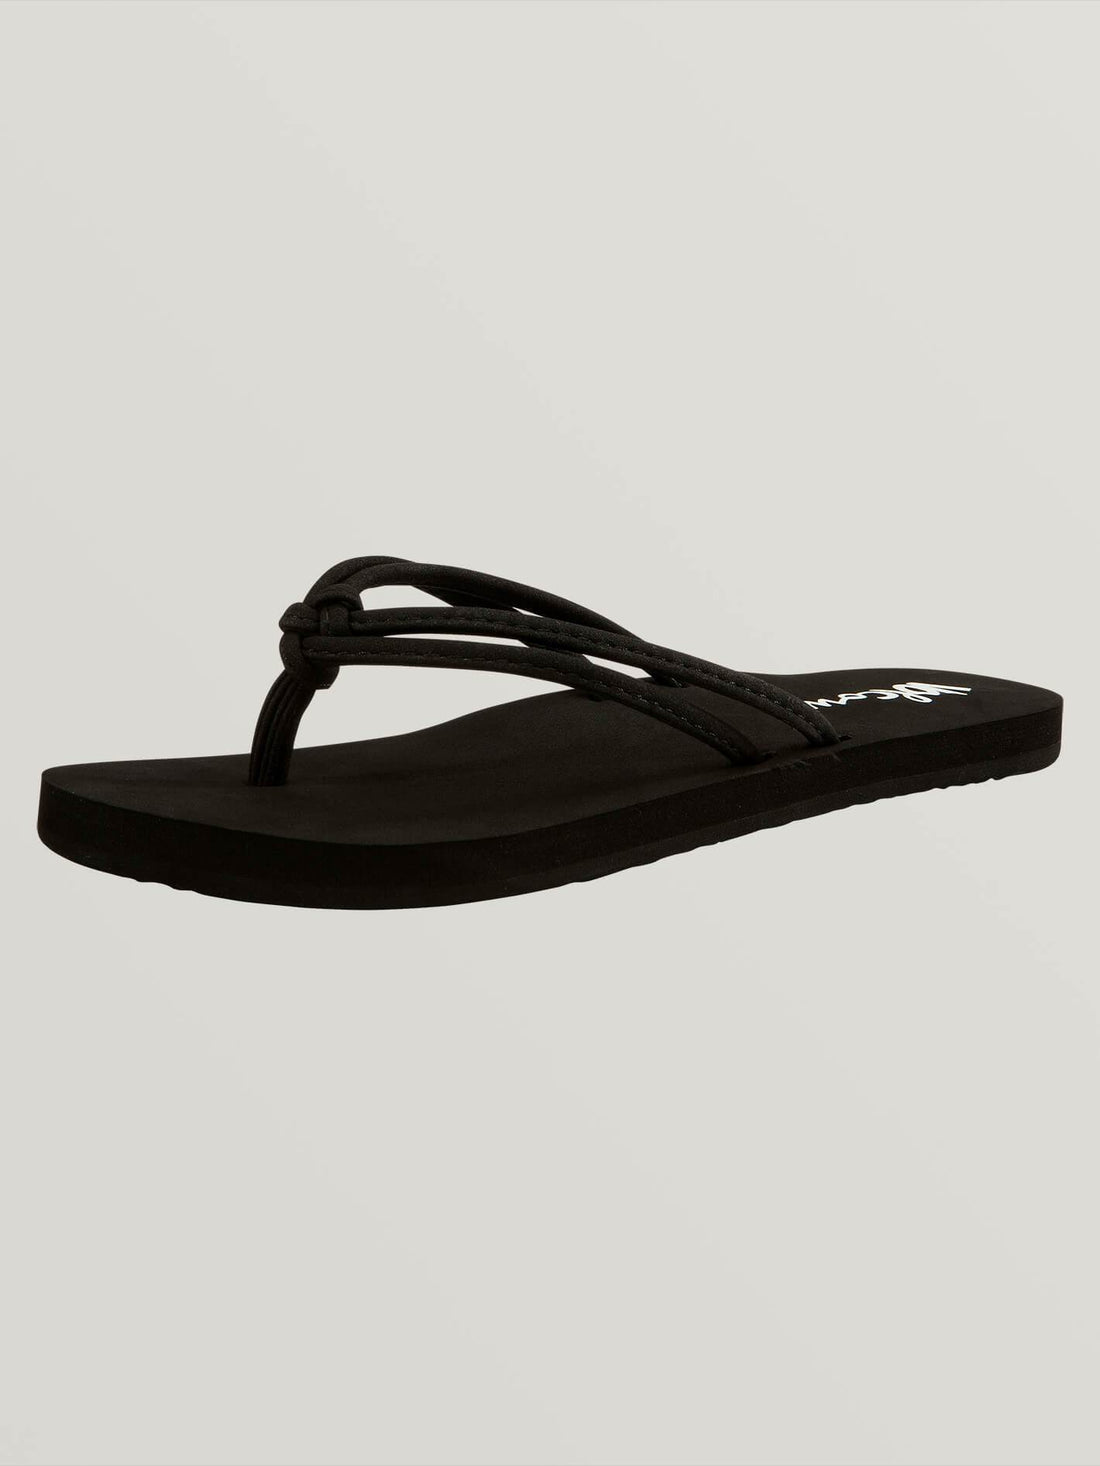 GIRLS FOREVER AND EVER SANDALS - BLACK